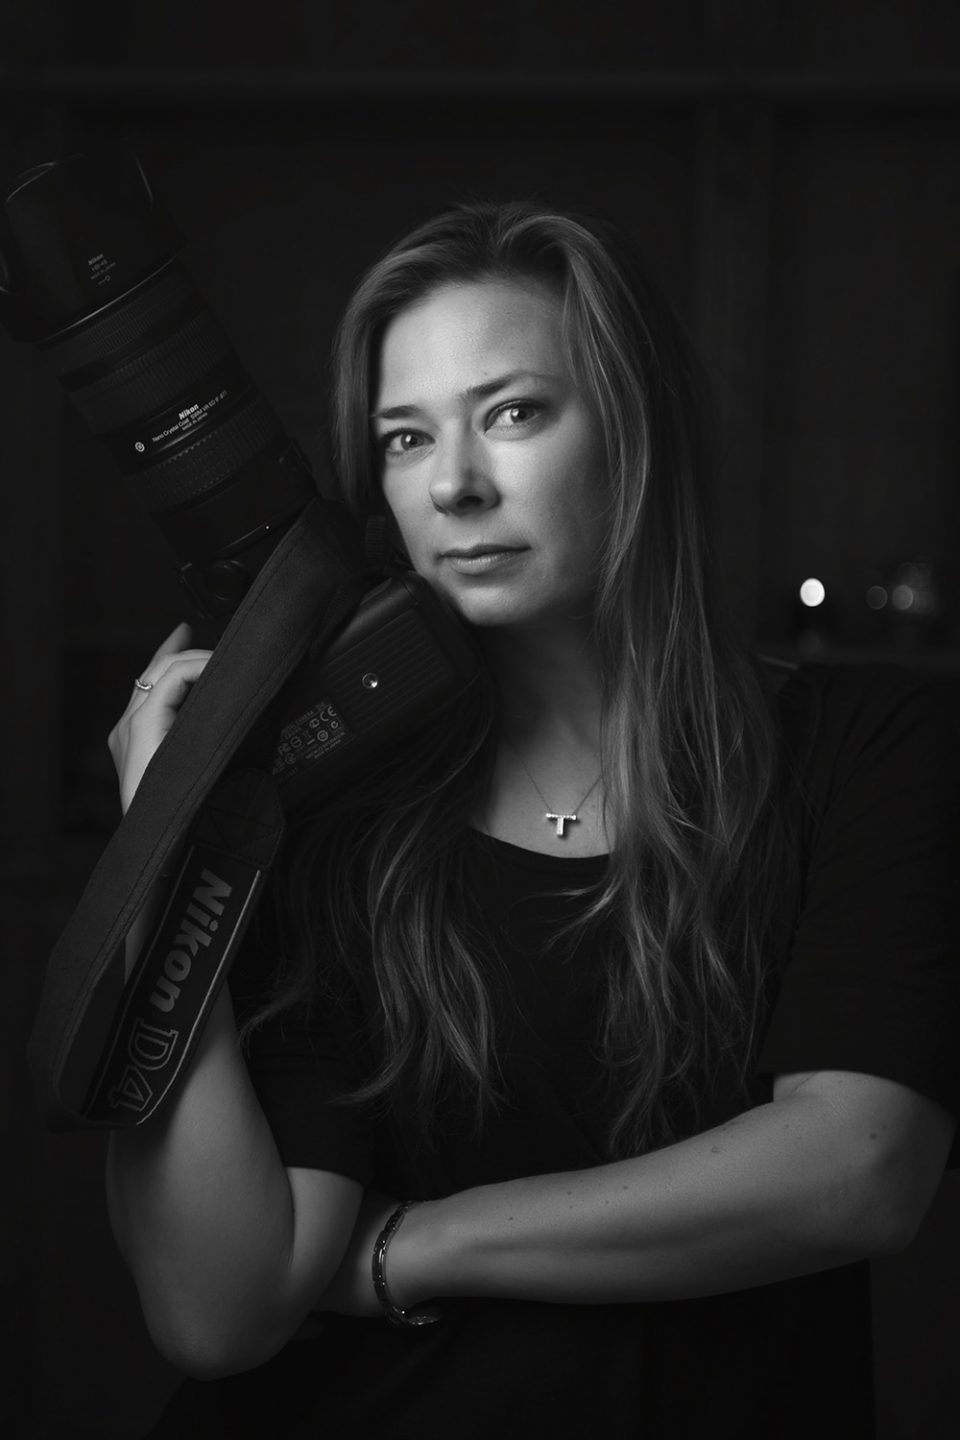 black and white photo of melbourne photographer Tanya wilson photographer posing with camera near face